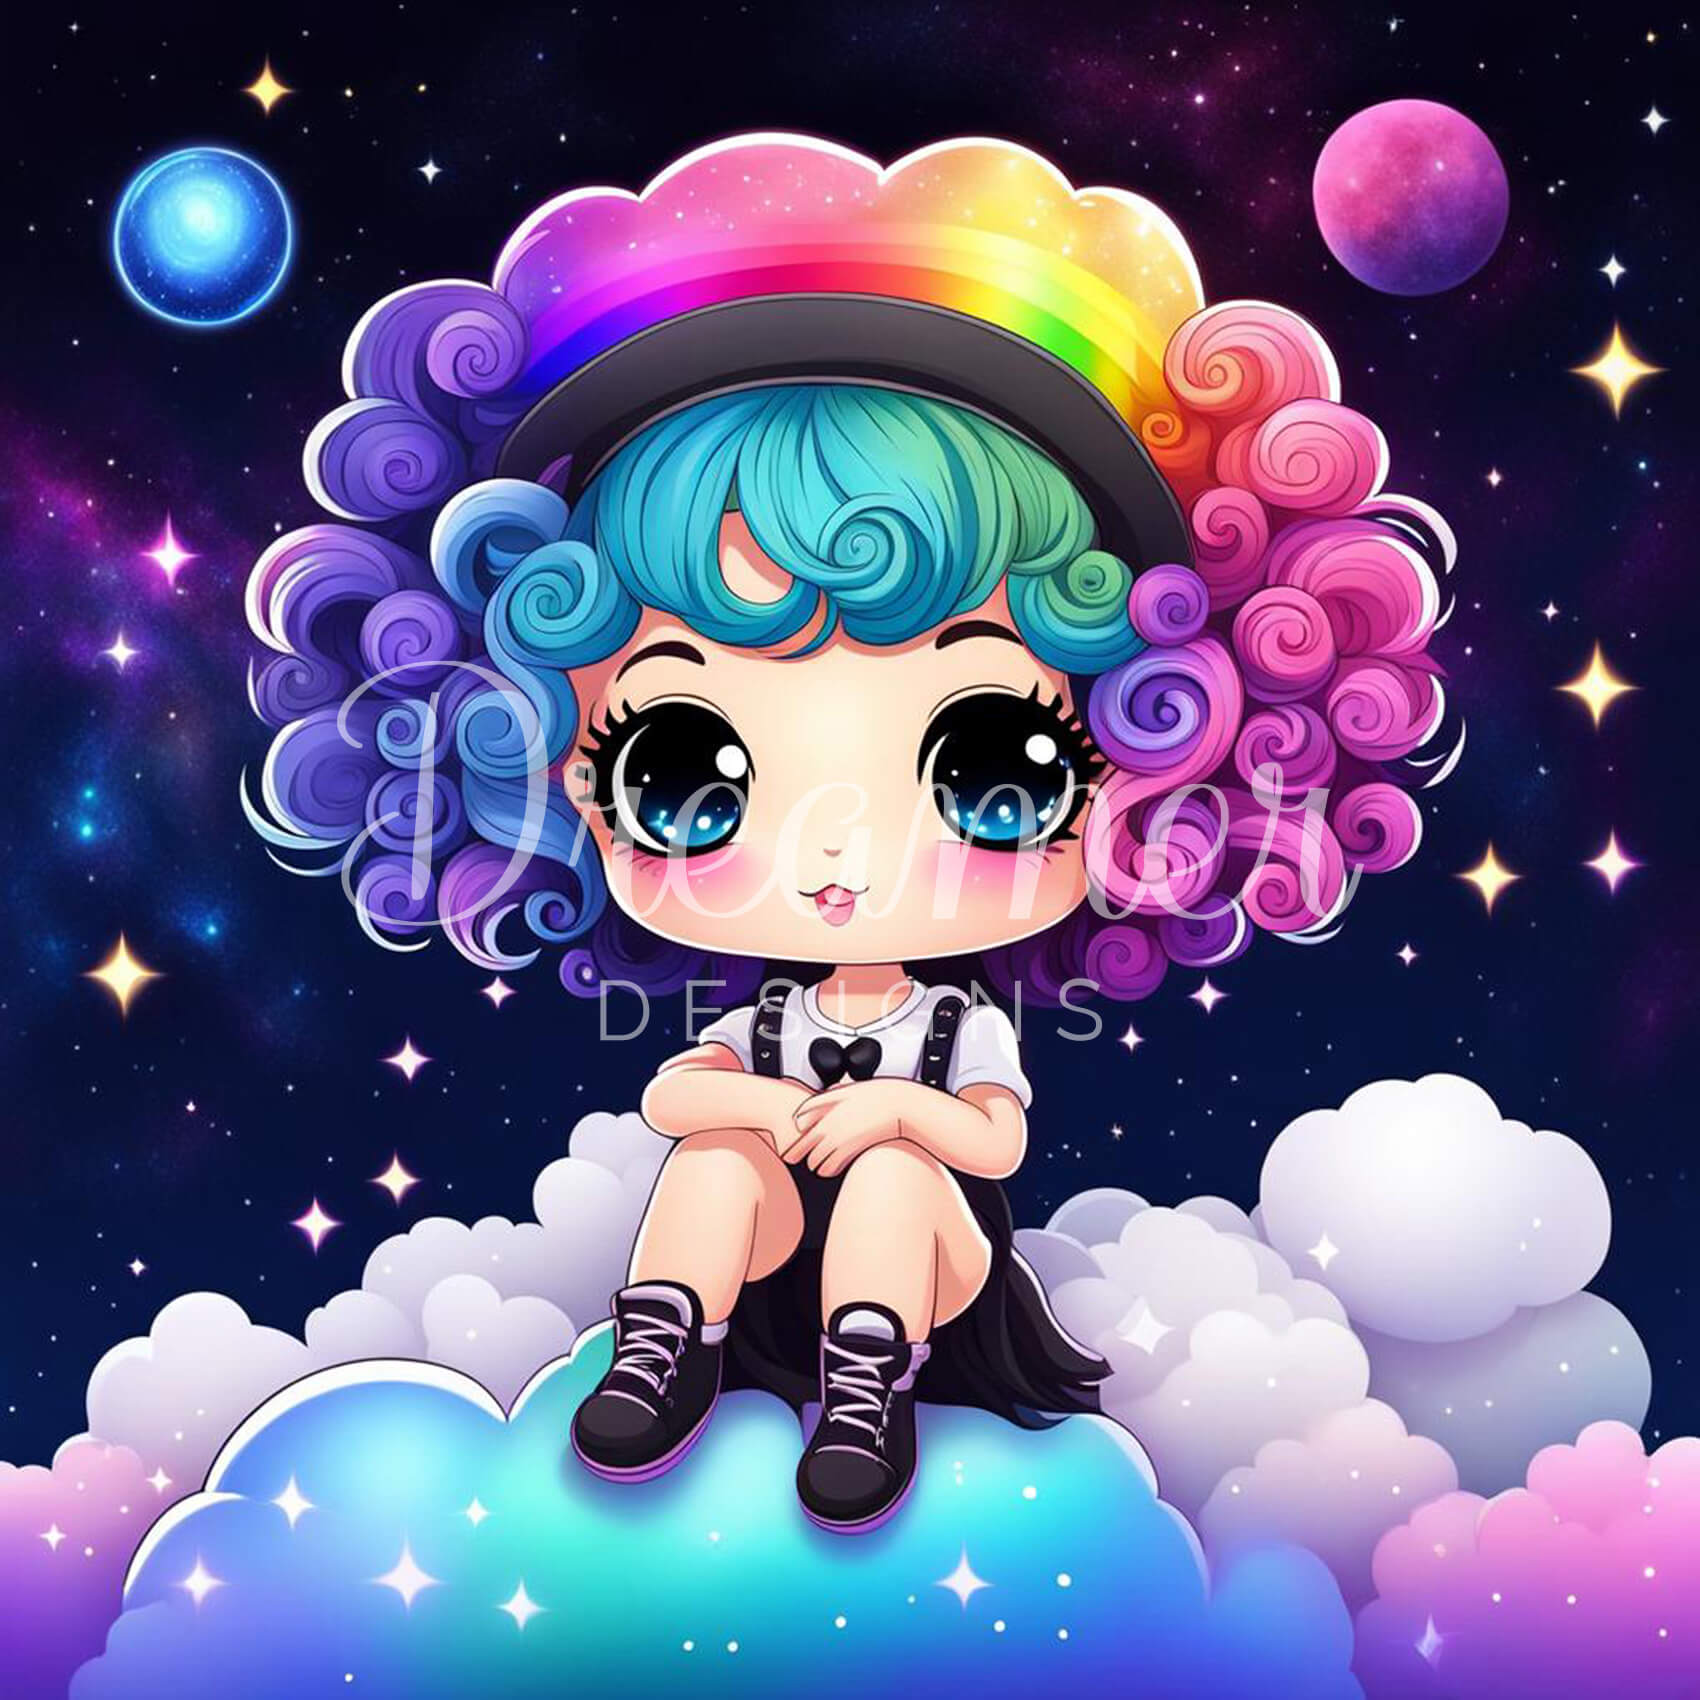 Kawaii In The Clouds